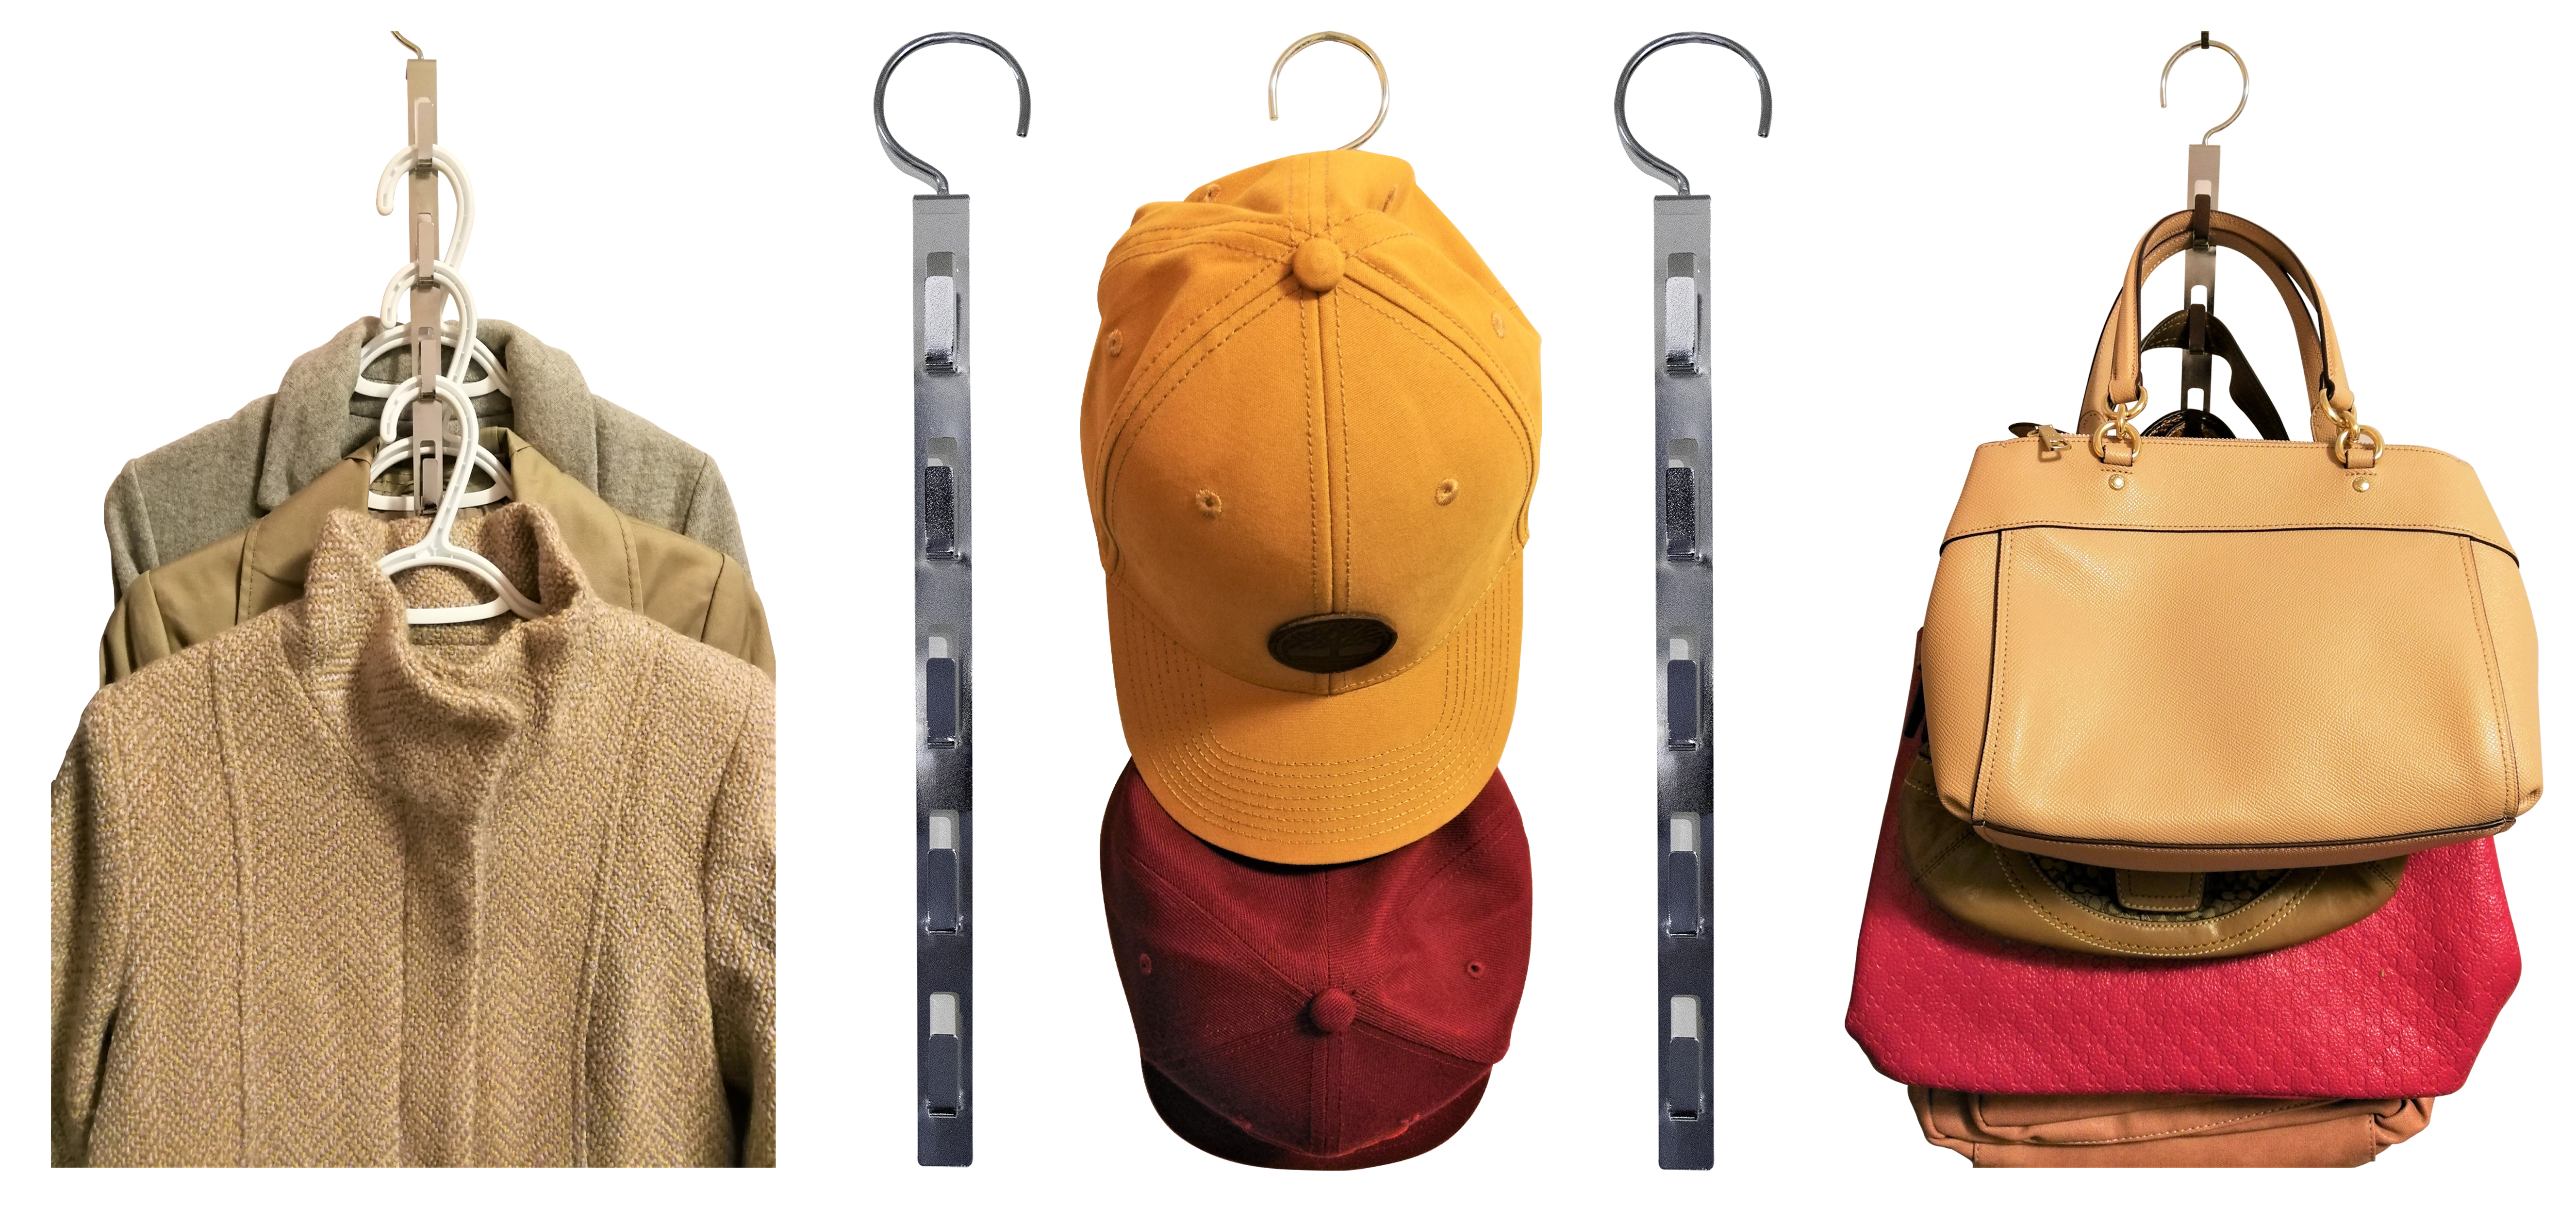 D'klutz multifuntional hanger that hangs coats, caps, bags (in fall colors)